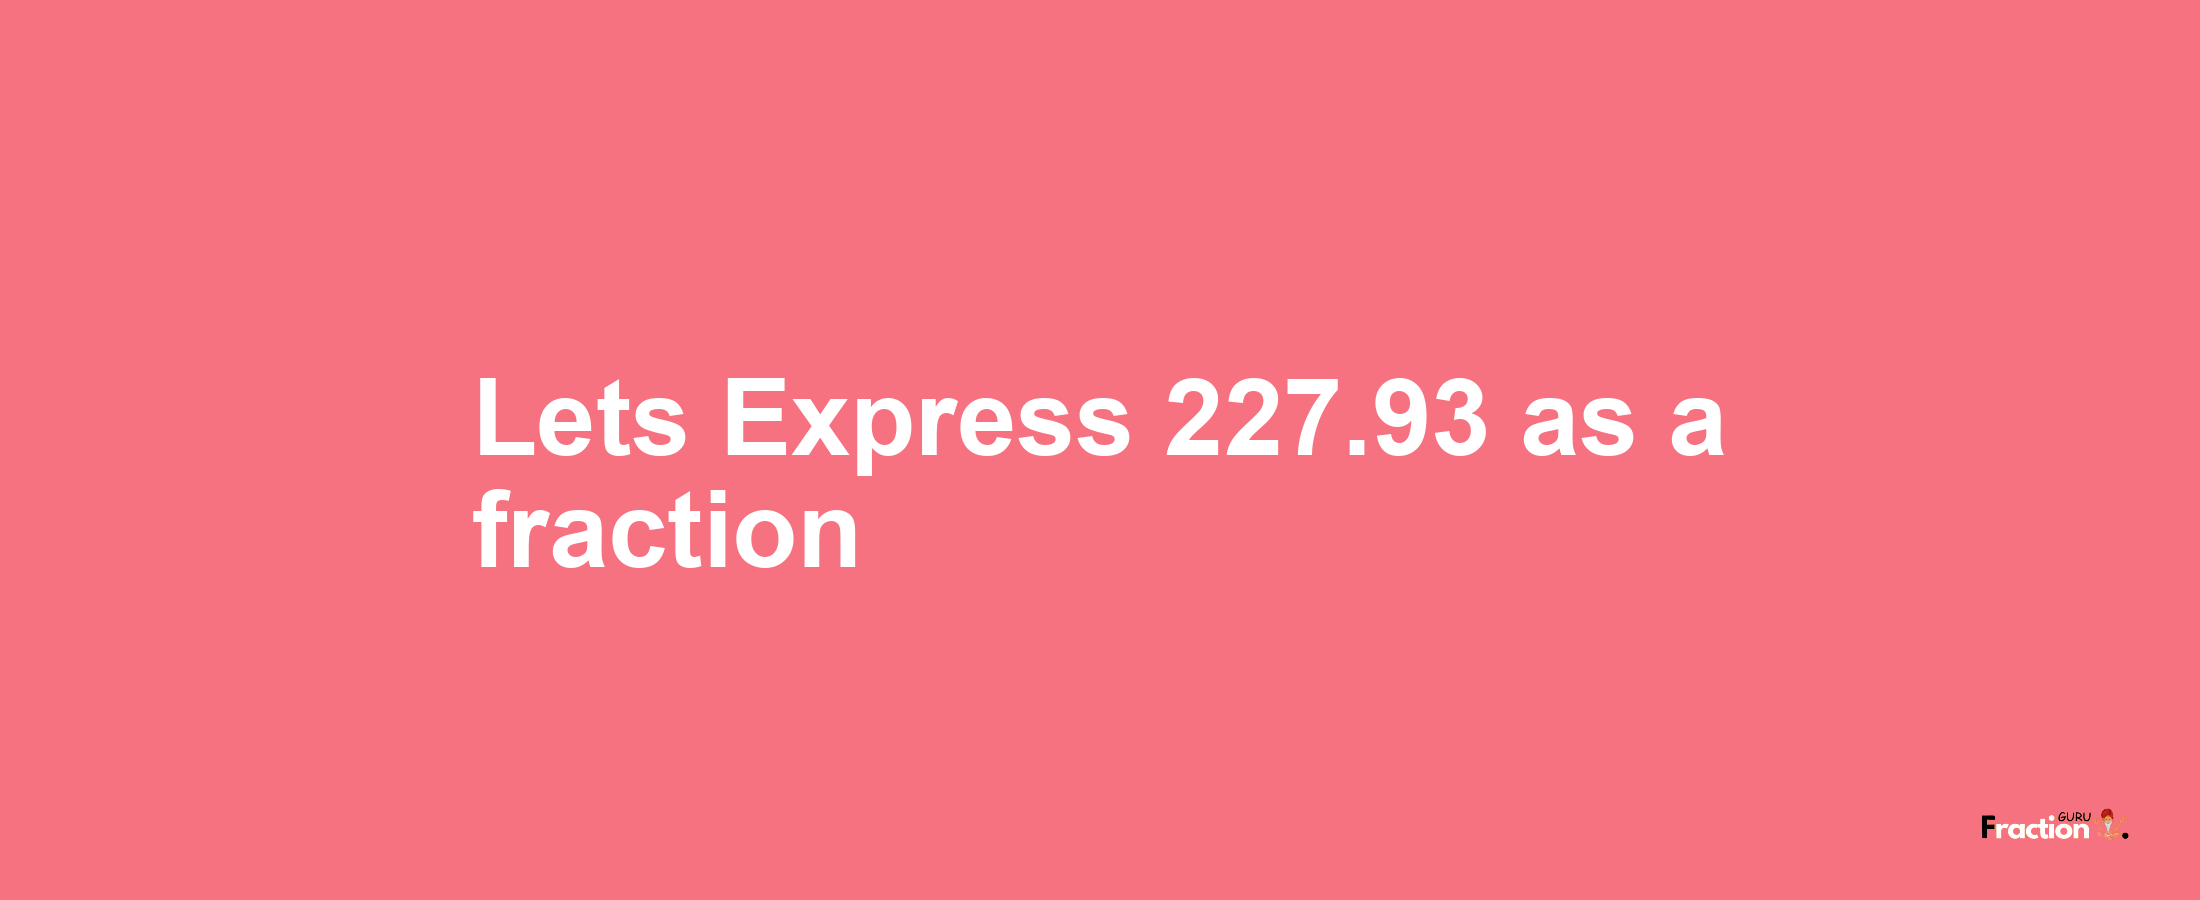 Lets Express 227.93 as afraction